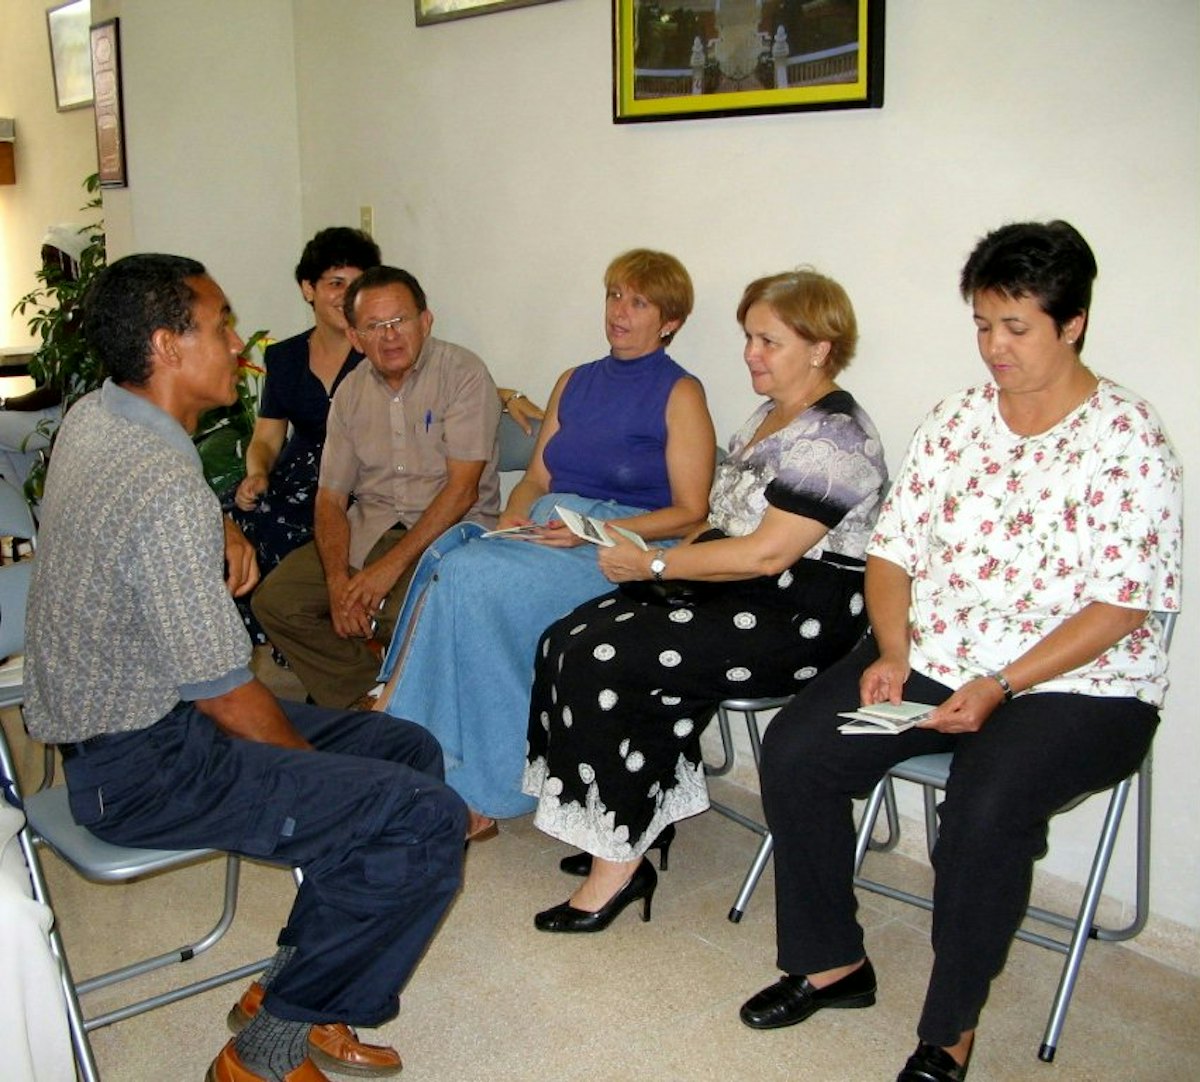 The chief of religious affairs in the Cuban government, Caridad Diego Bello (second from right), and her staff in discussion with some members of the National Spiritual Assembly of the Baha'is of Cuba at the national Baha'i center.